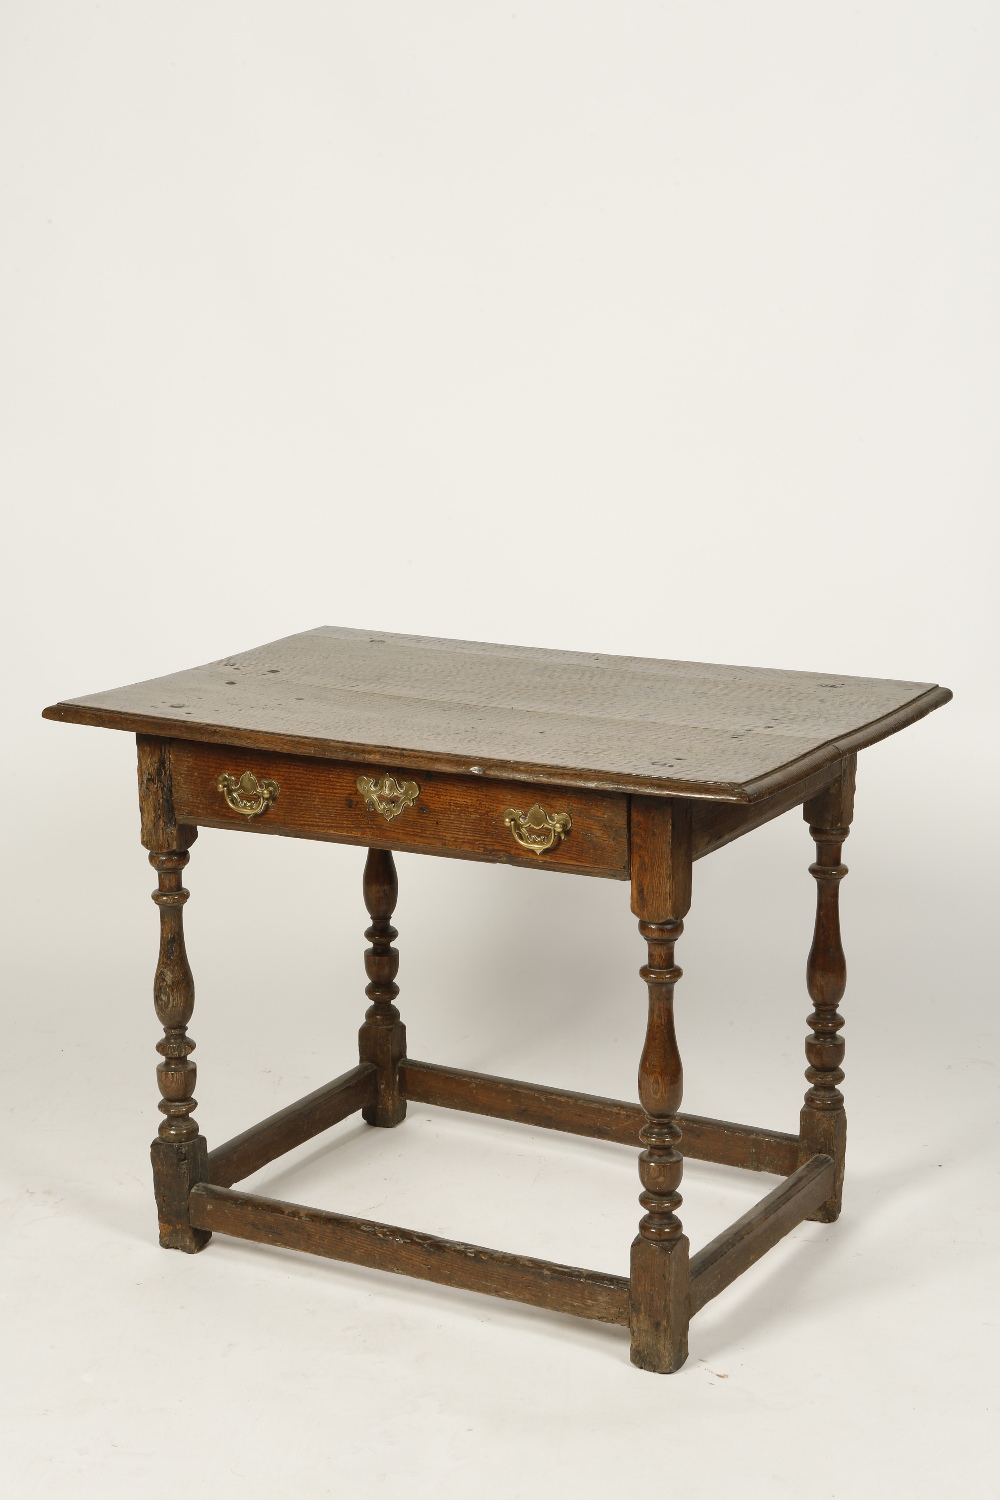 AN EARLY 18TH CENTURY OAK SIDE TABLE, the rectangular top with a moulded border above a single